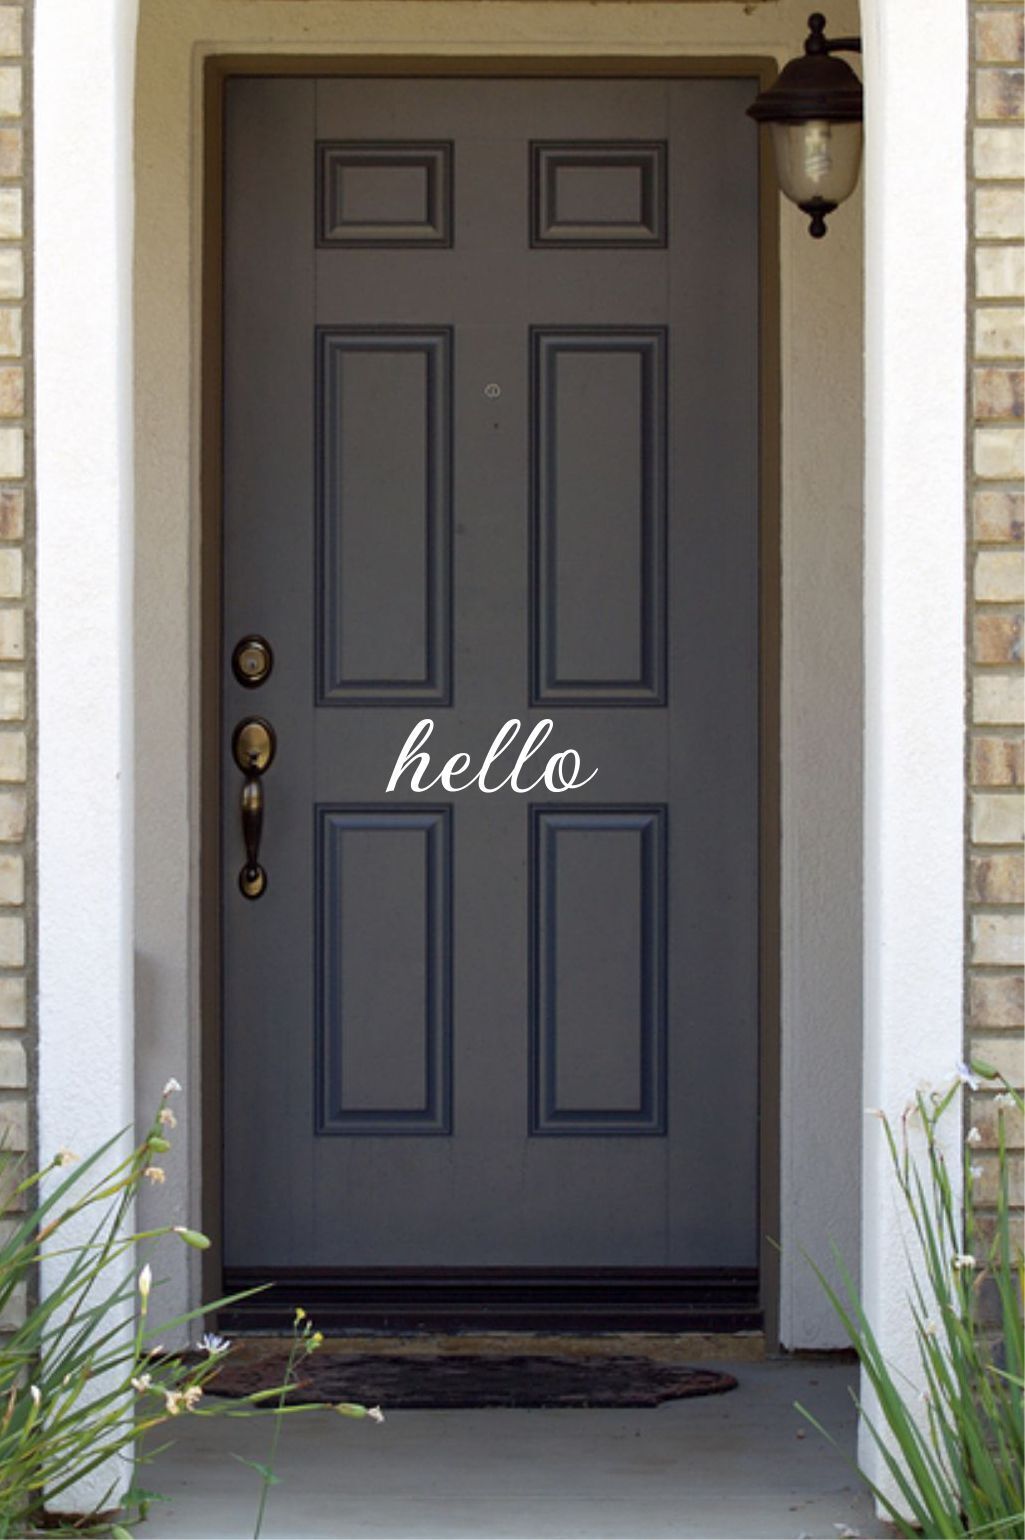 Hello cute Door vinyl decal sticker home decor decoration welcome house entry